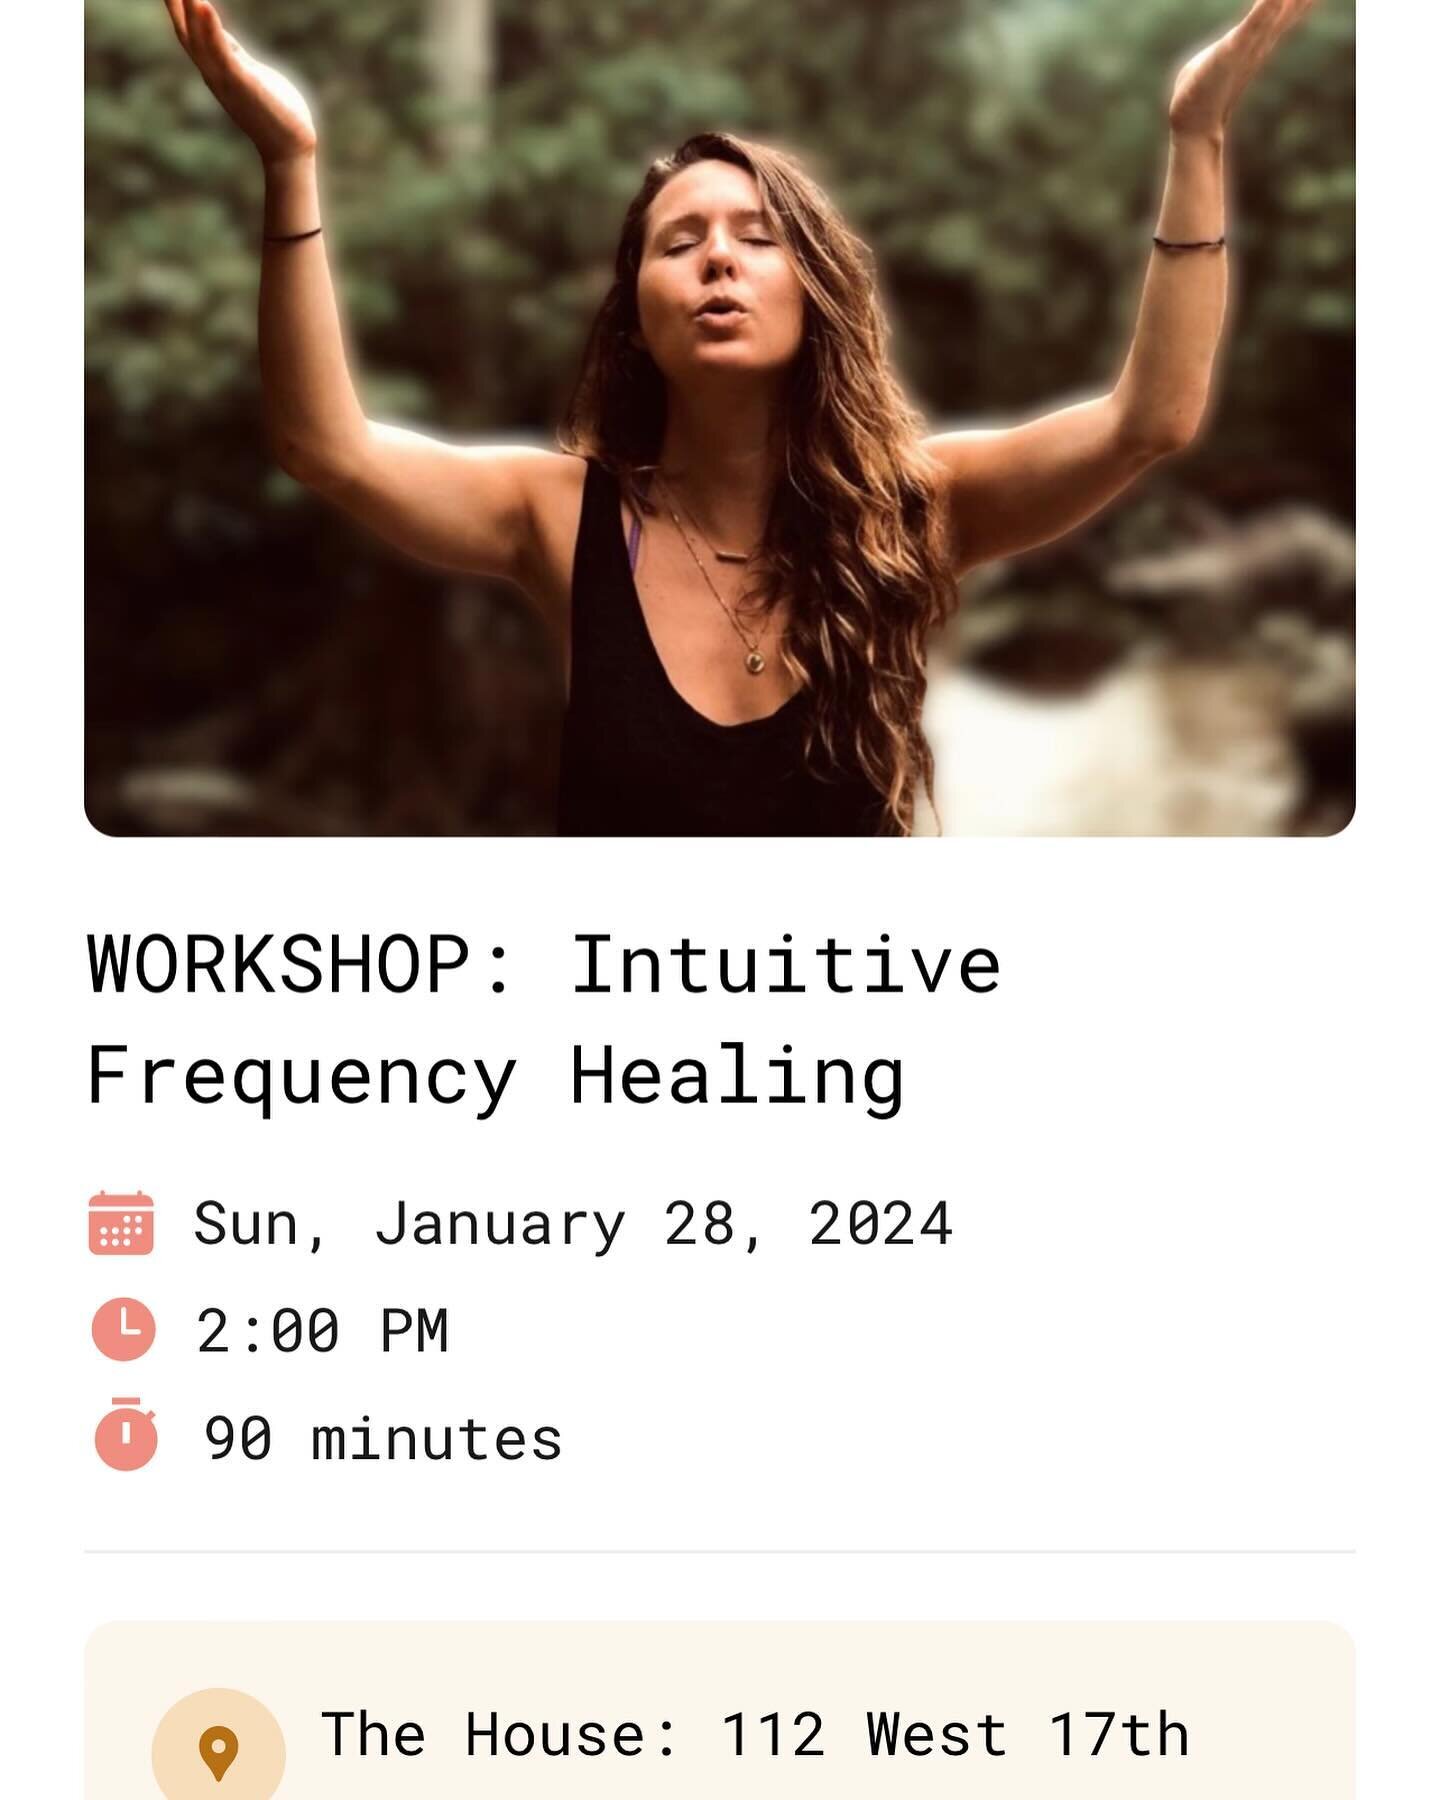 New York: who has been missing in person frequency healing? This event will be intimate and profound. 

It has been my intention for sometime now to offer Group frequency healing experiences again. group transformation is even wildly powerful because